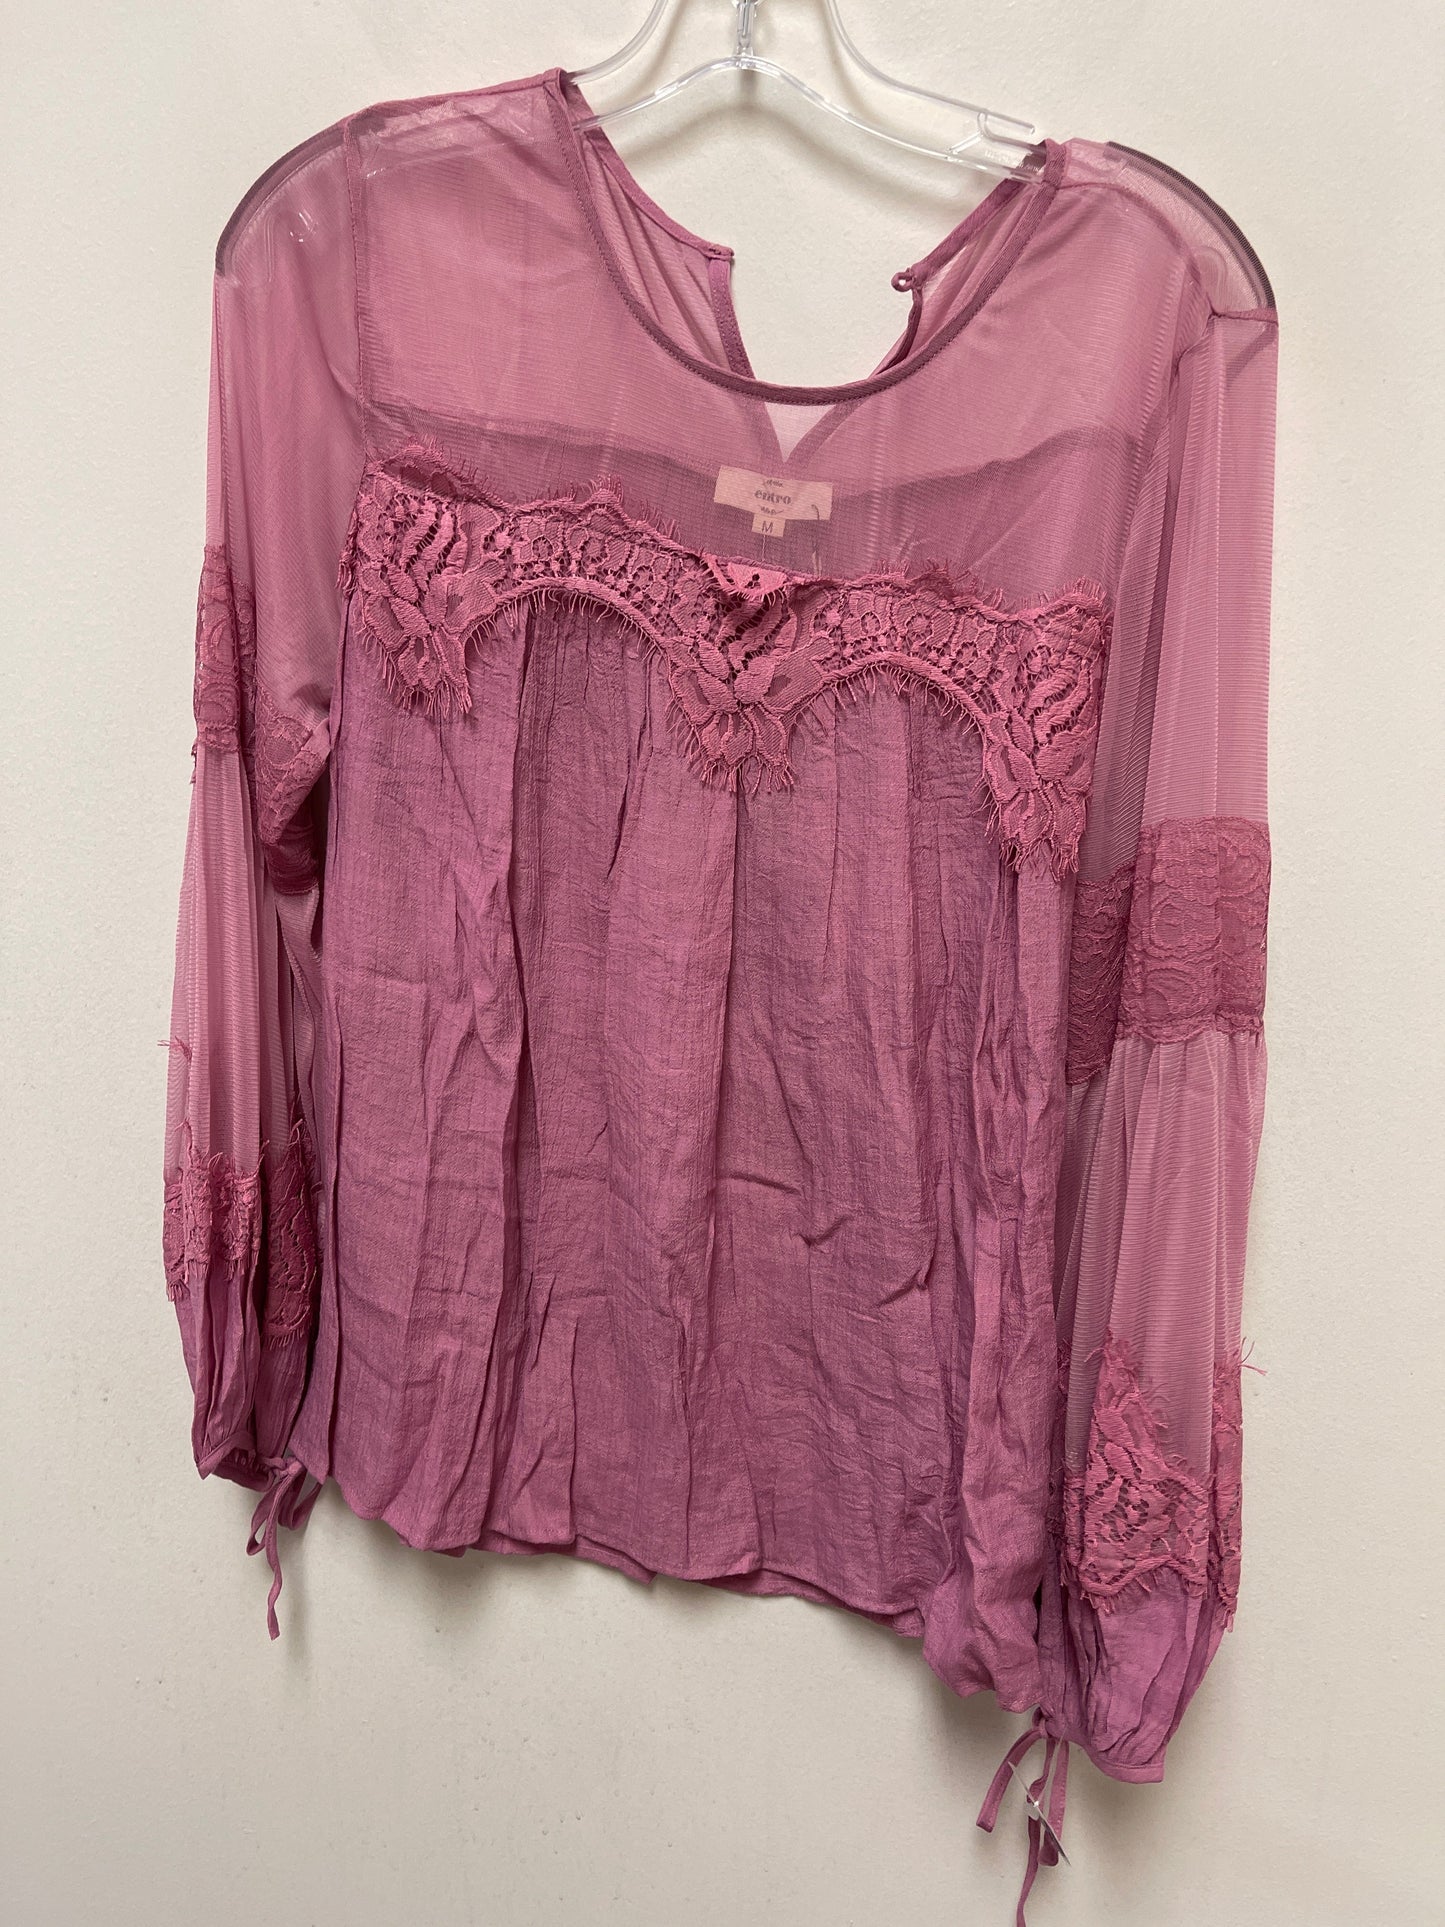 Pink Top Long Sleeve Entro, Size M